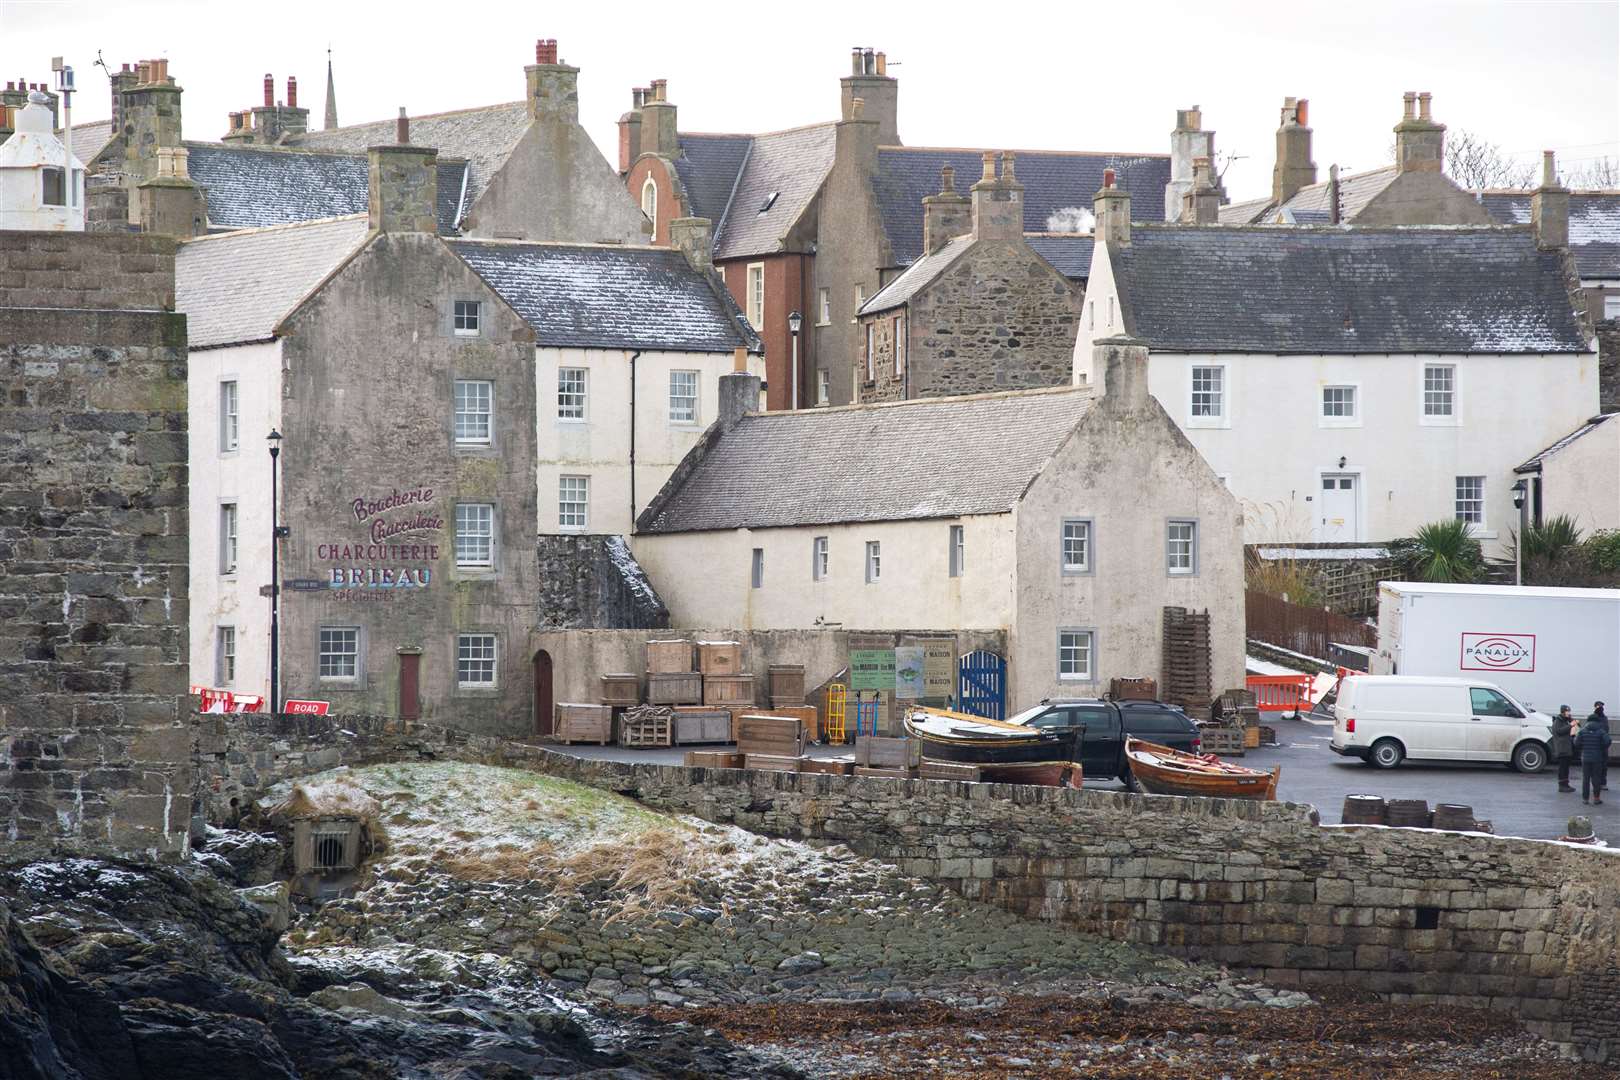 Portsoy's harbour area ahead of filming on the sixth season of Peaky Blinders. Picture: Daniel Forsyth.